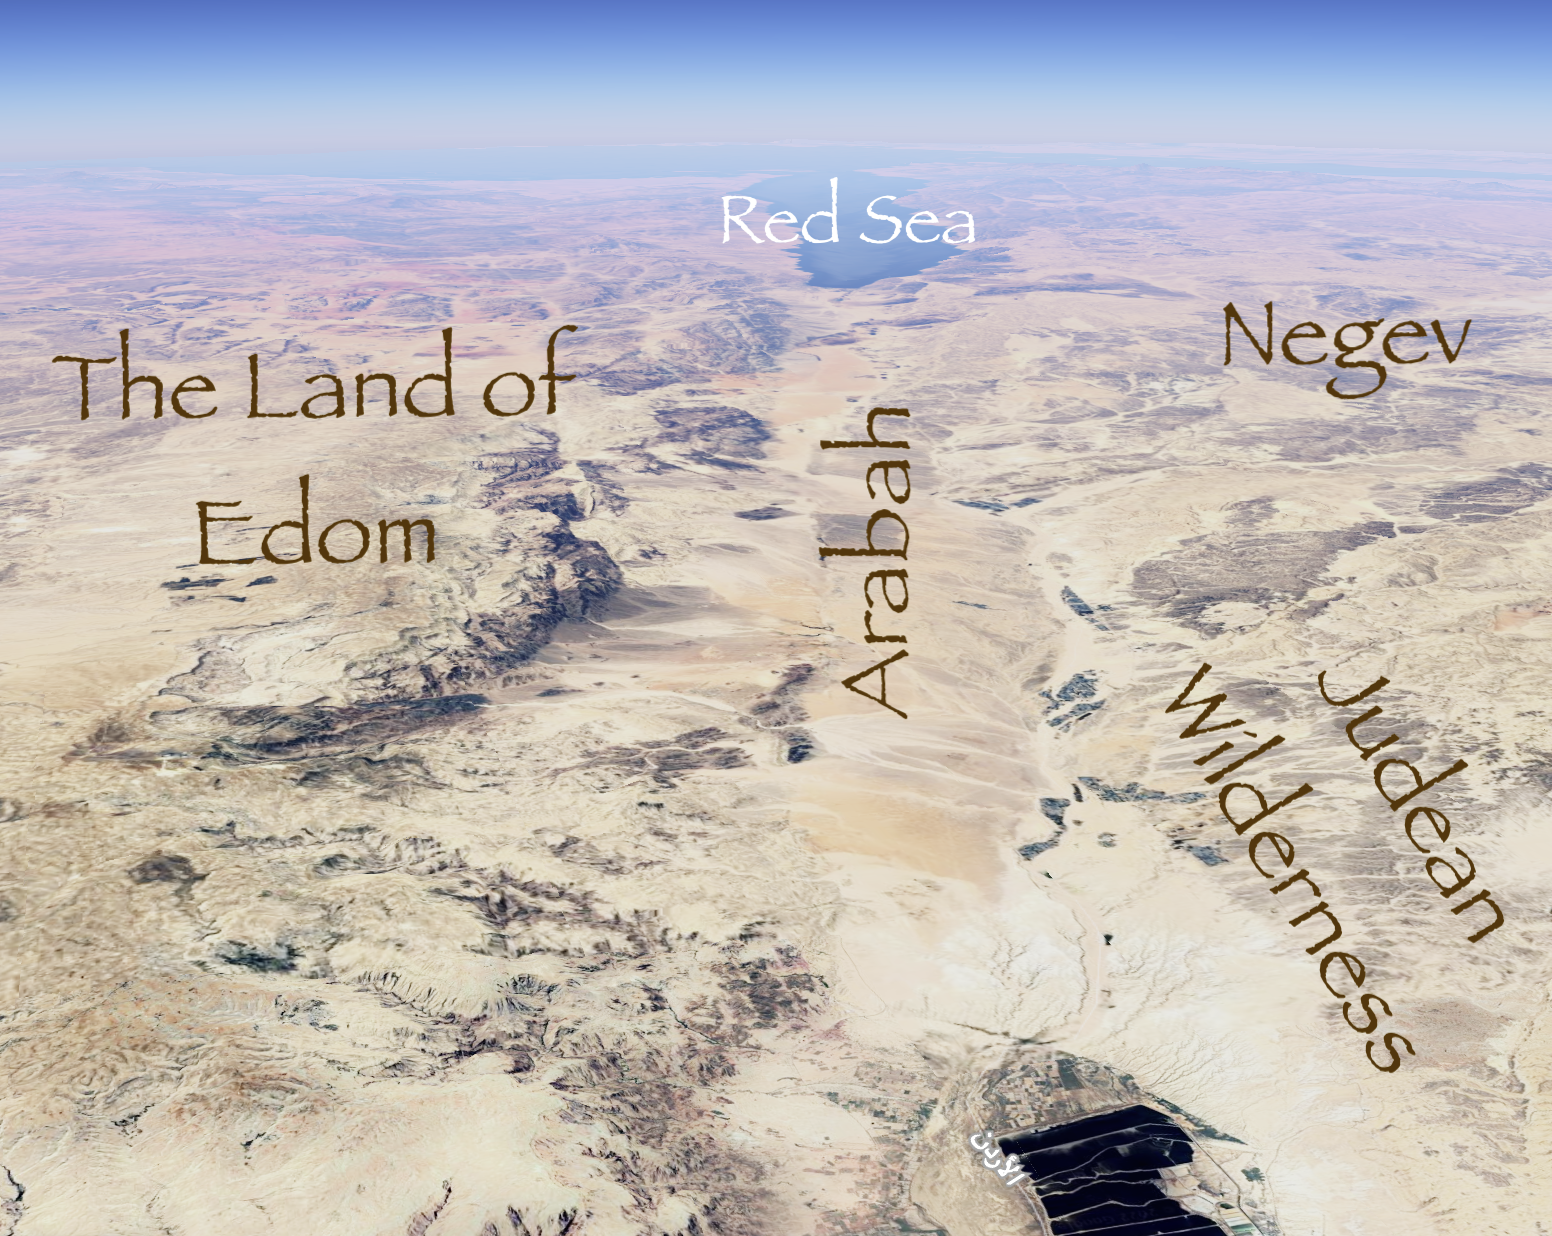 The land of Edom towered above the Arabah occupying the rugged mountains to the southeast of the Dead Sea.